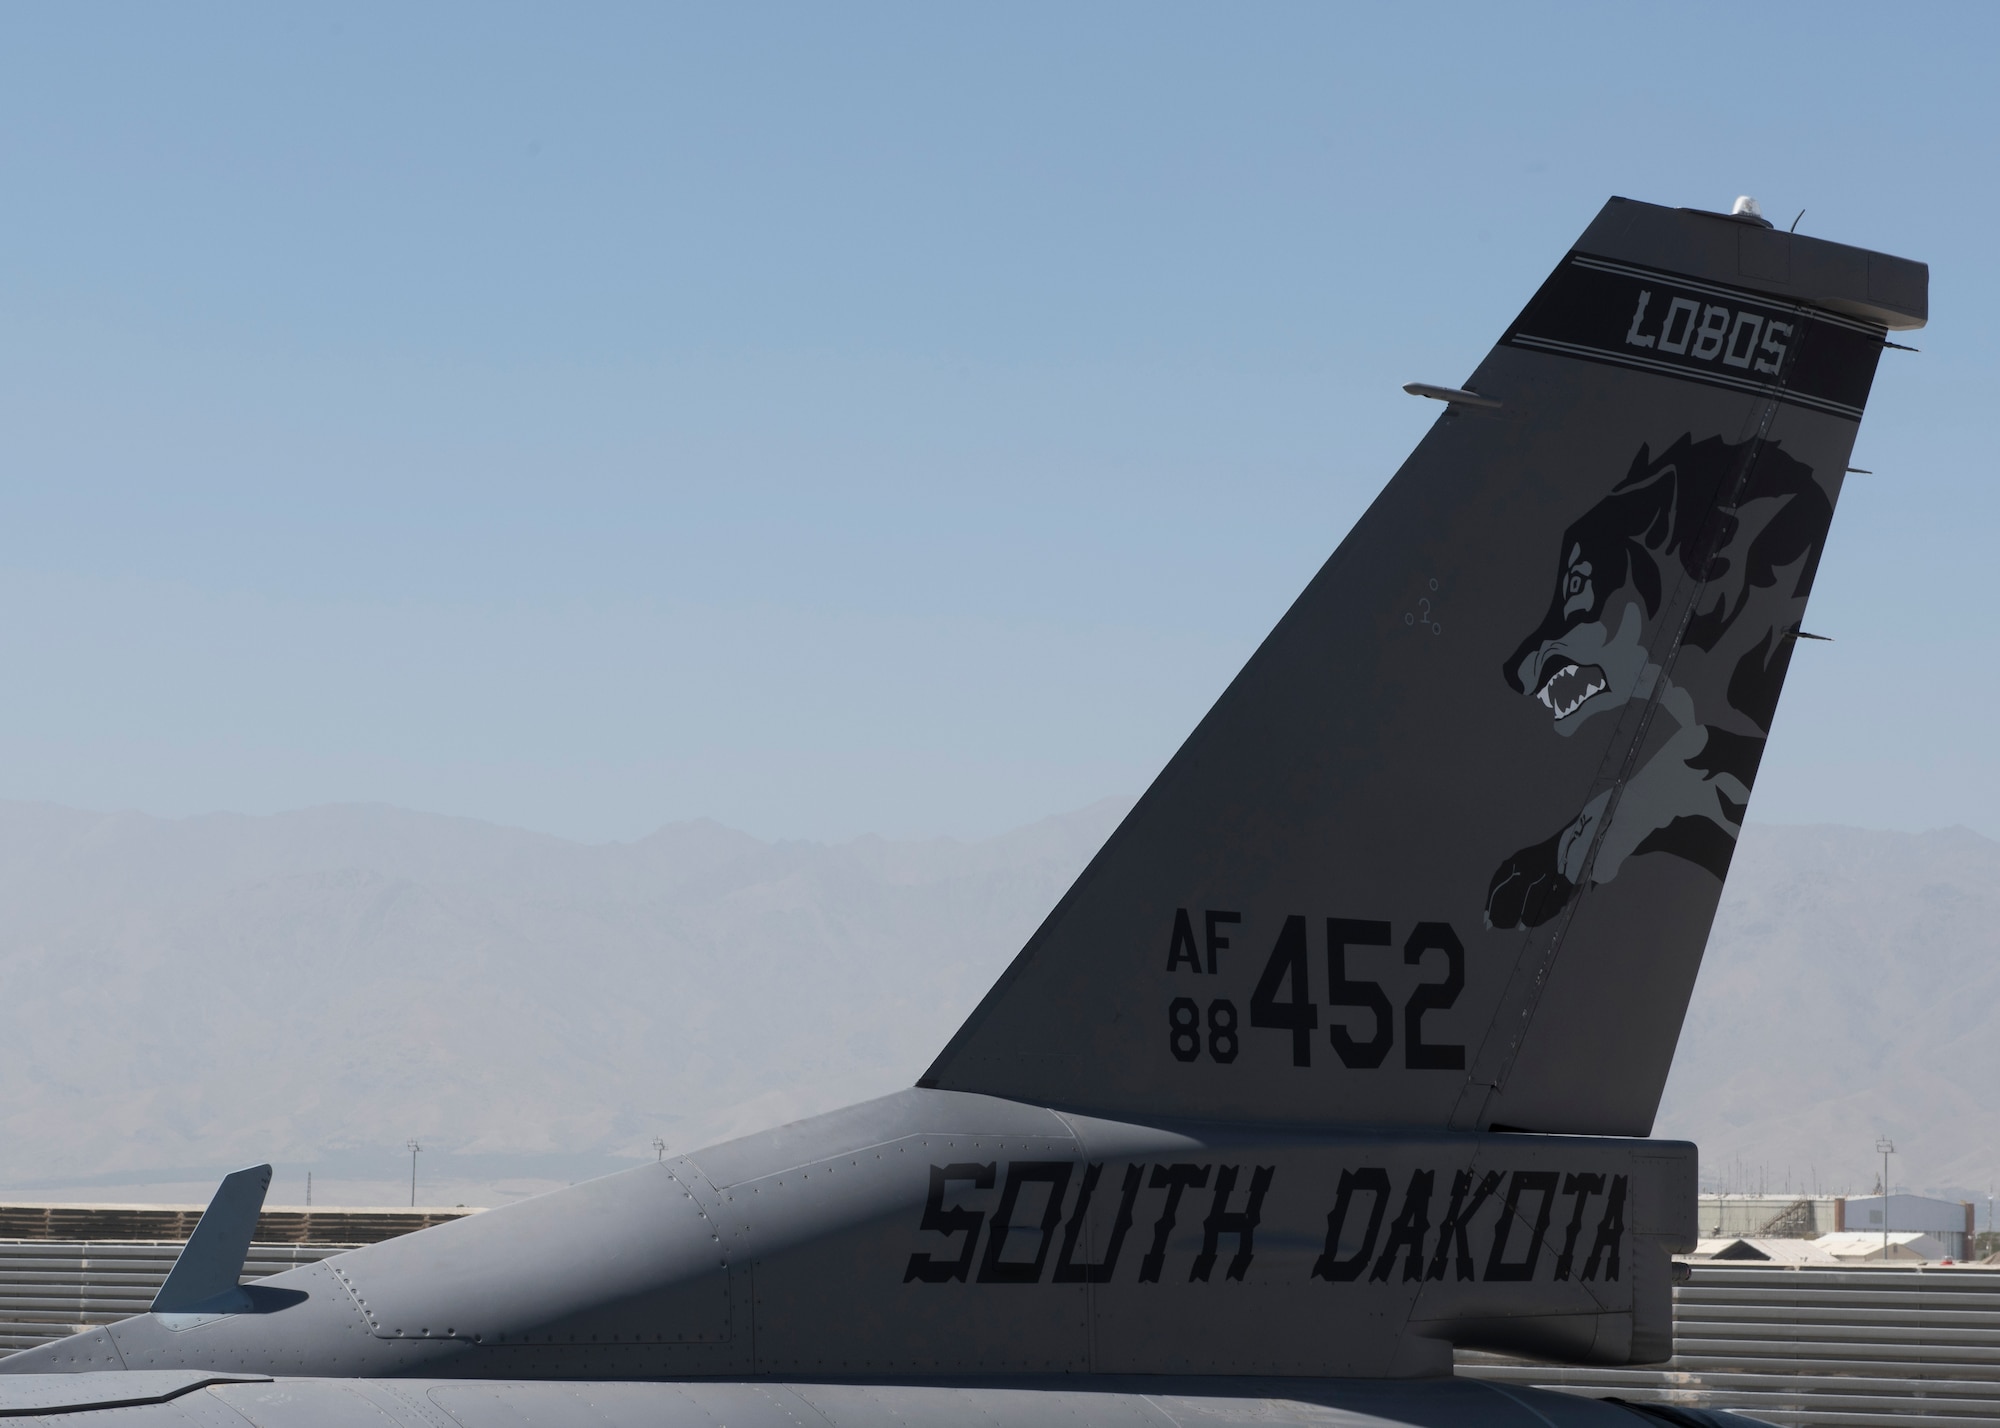 An F-16 Fighting Falcon from the 175th Expeditionary Fighter Squadron, South Dakota Air National Guard, sits on the ramp at Bagram Airfield, Afghanistan, August 5, 2018. The 175th EFS are deployed from the 114th Fighter Wing, Joe Foss Field, Sioux Falls, in support of combat operations in Afghanistan. (U.S. Air Force photo by Tech. Sgt. Eugene Crist)